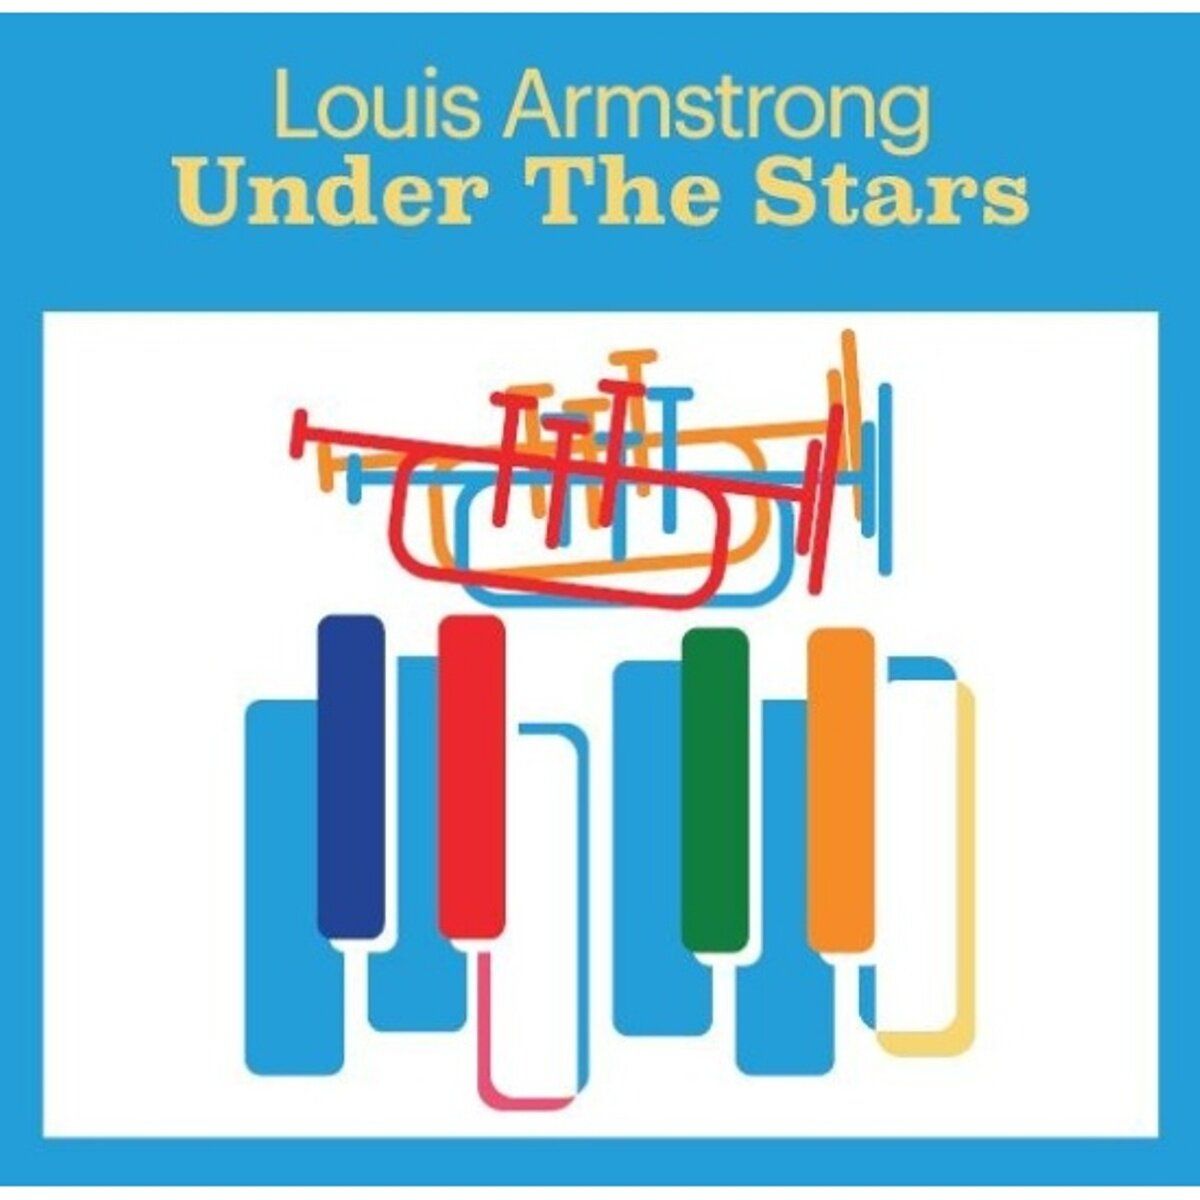 виниловая пластинка louis armstrong under the stars lp remastered stereo 200g 4601620108754, Виниловая пластинка Armstrong, Louis, Under The Stars